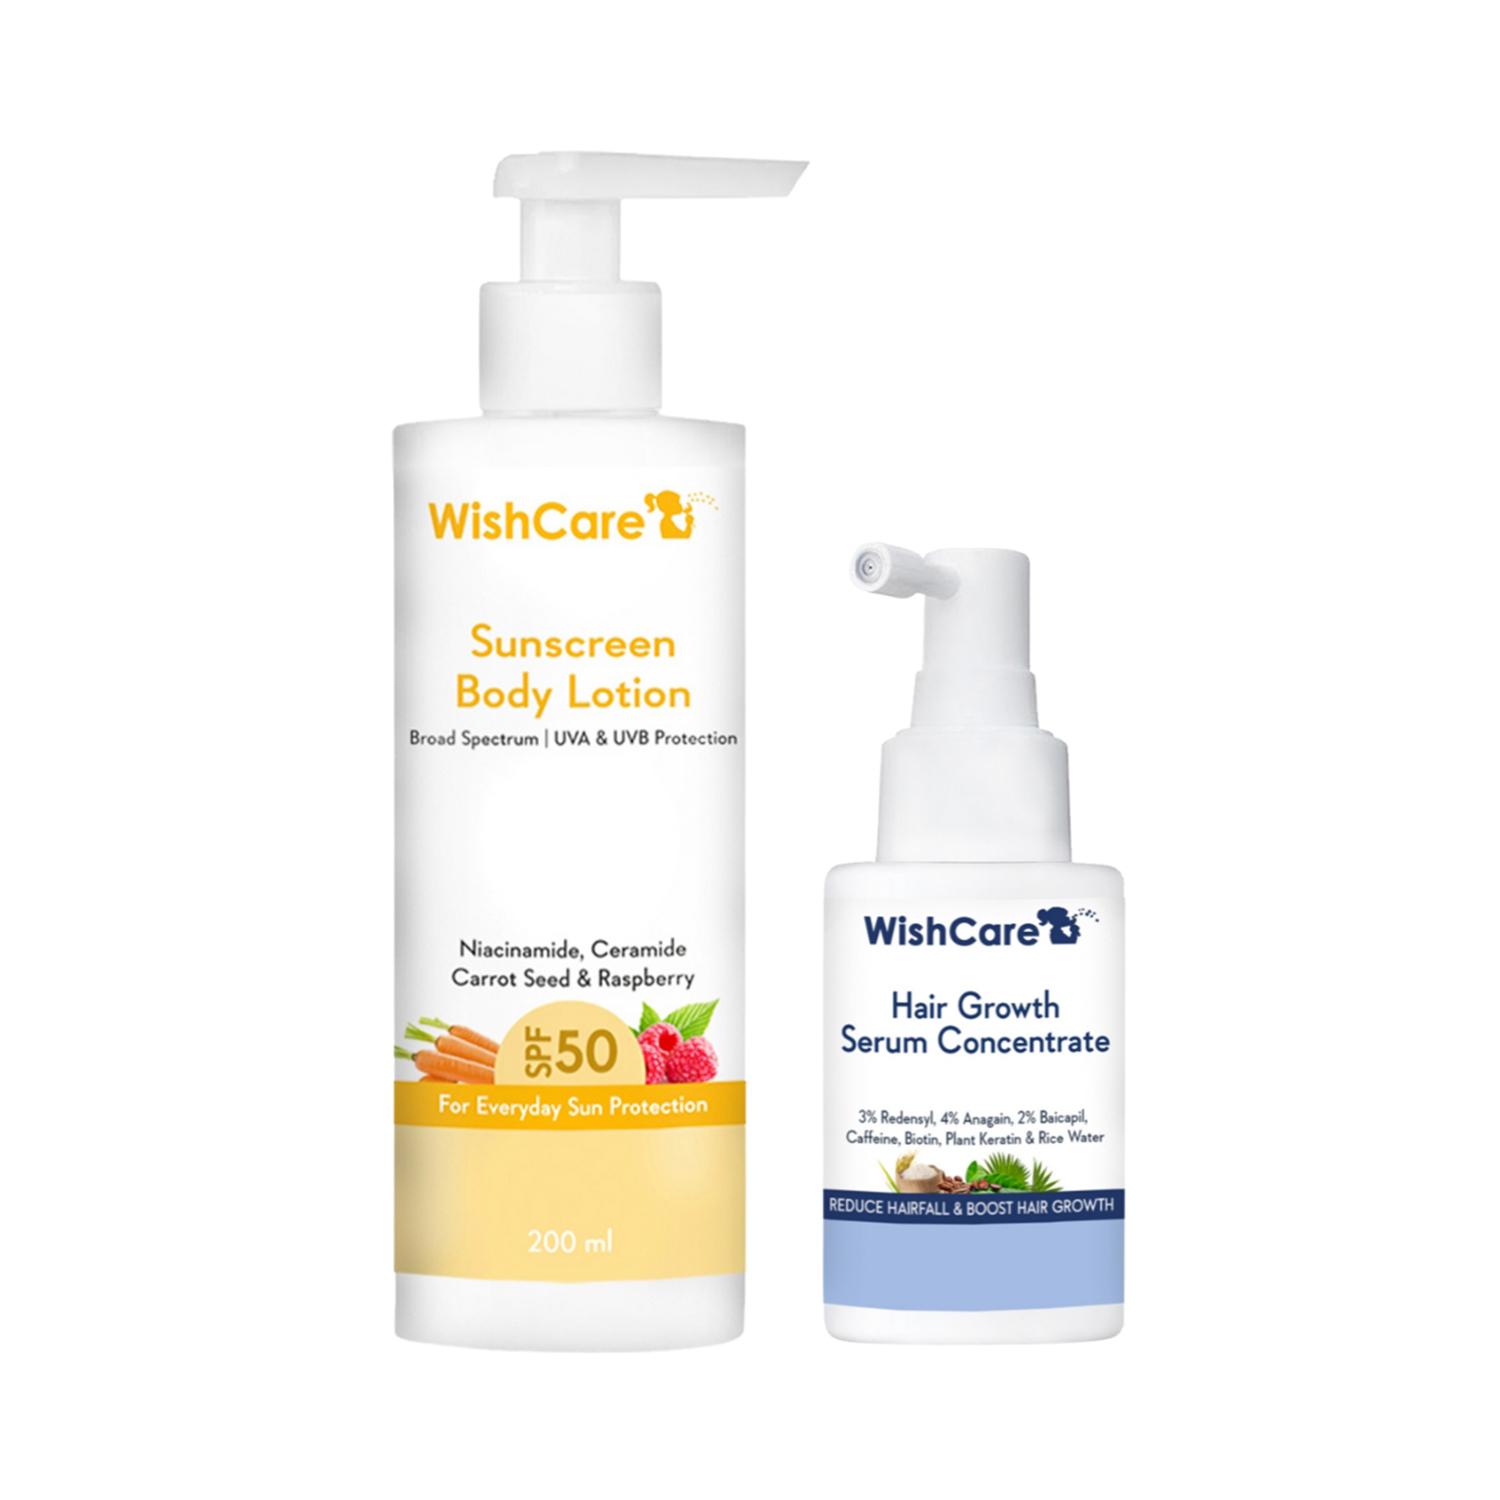 WishCare Hair Growth Serum Concentrate (30 ml) & SPF 50 Sunscreen Body Lotion (200 ml) Combo